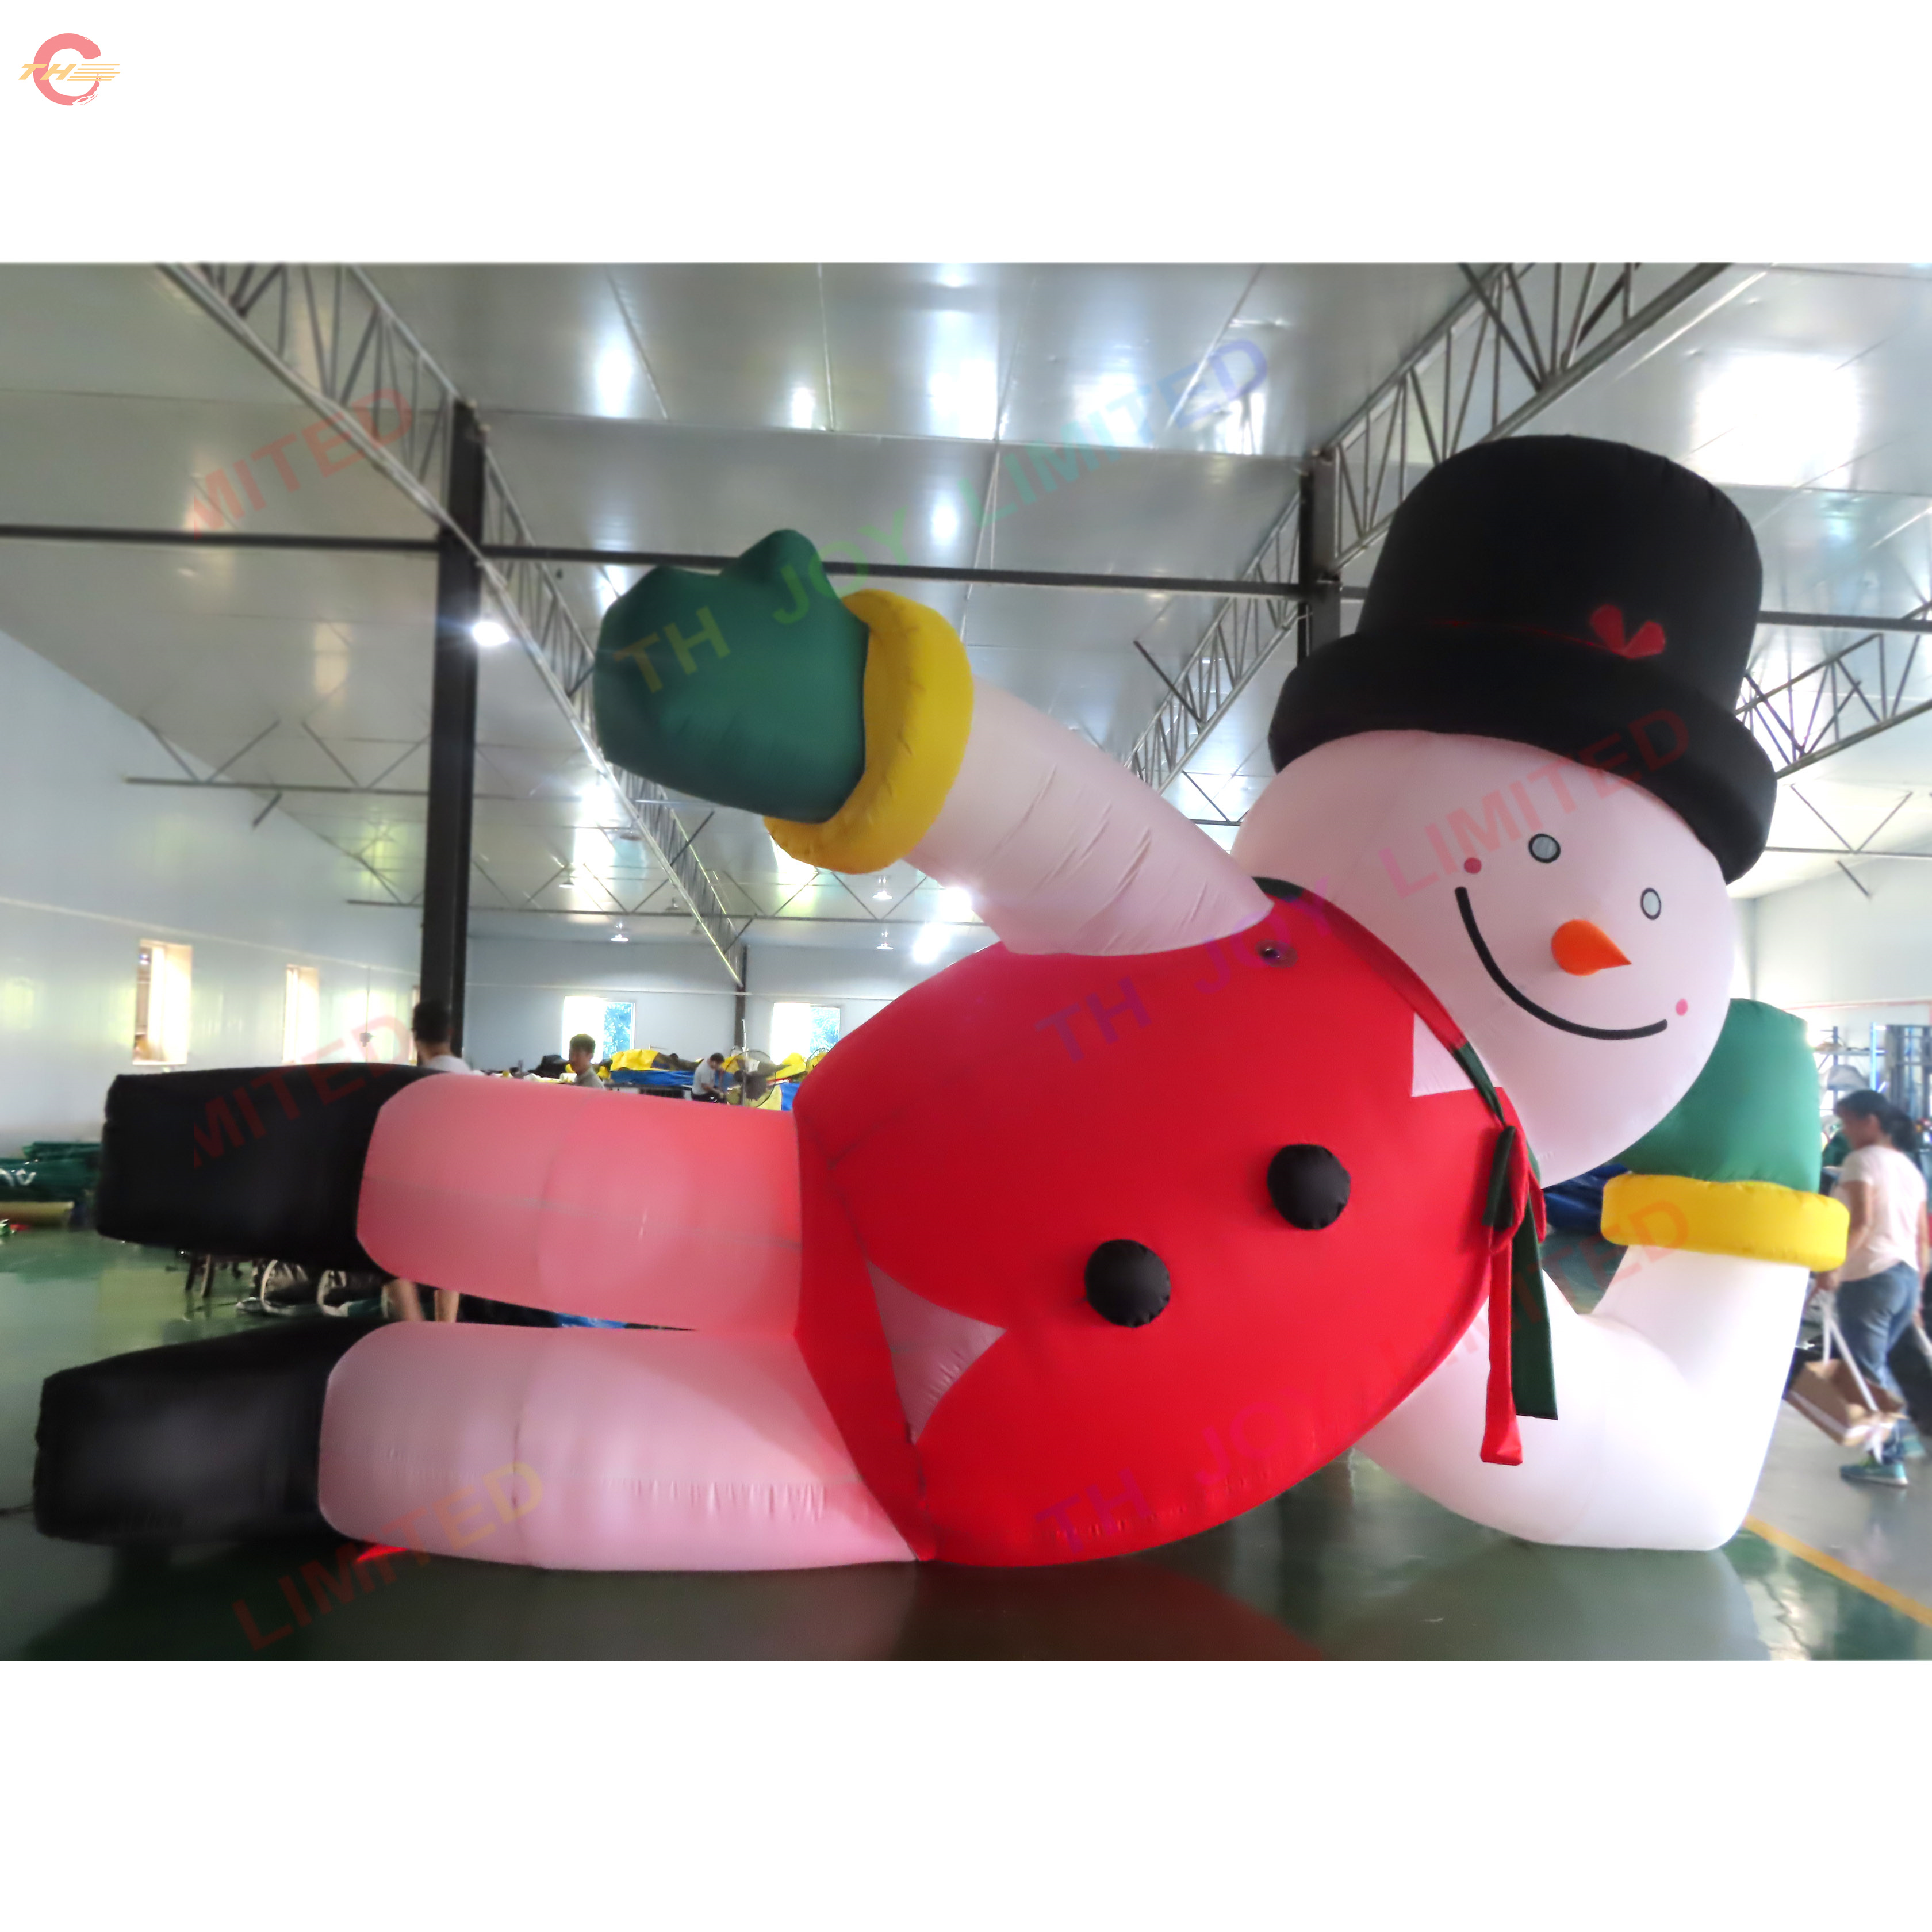 Free Air Ship Outdoor Activities Christmas Giant Inflatable Snowman Cartoon for sale